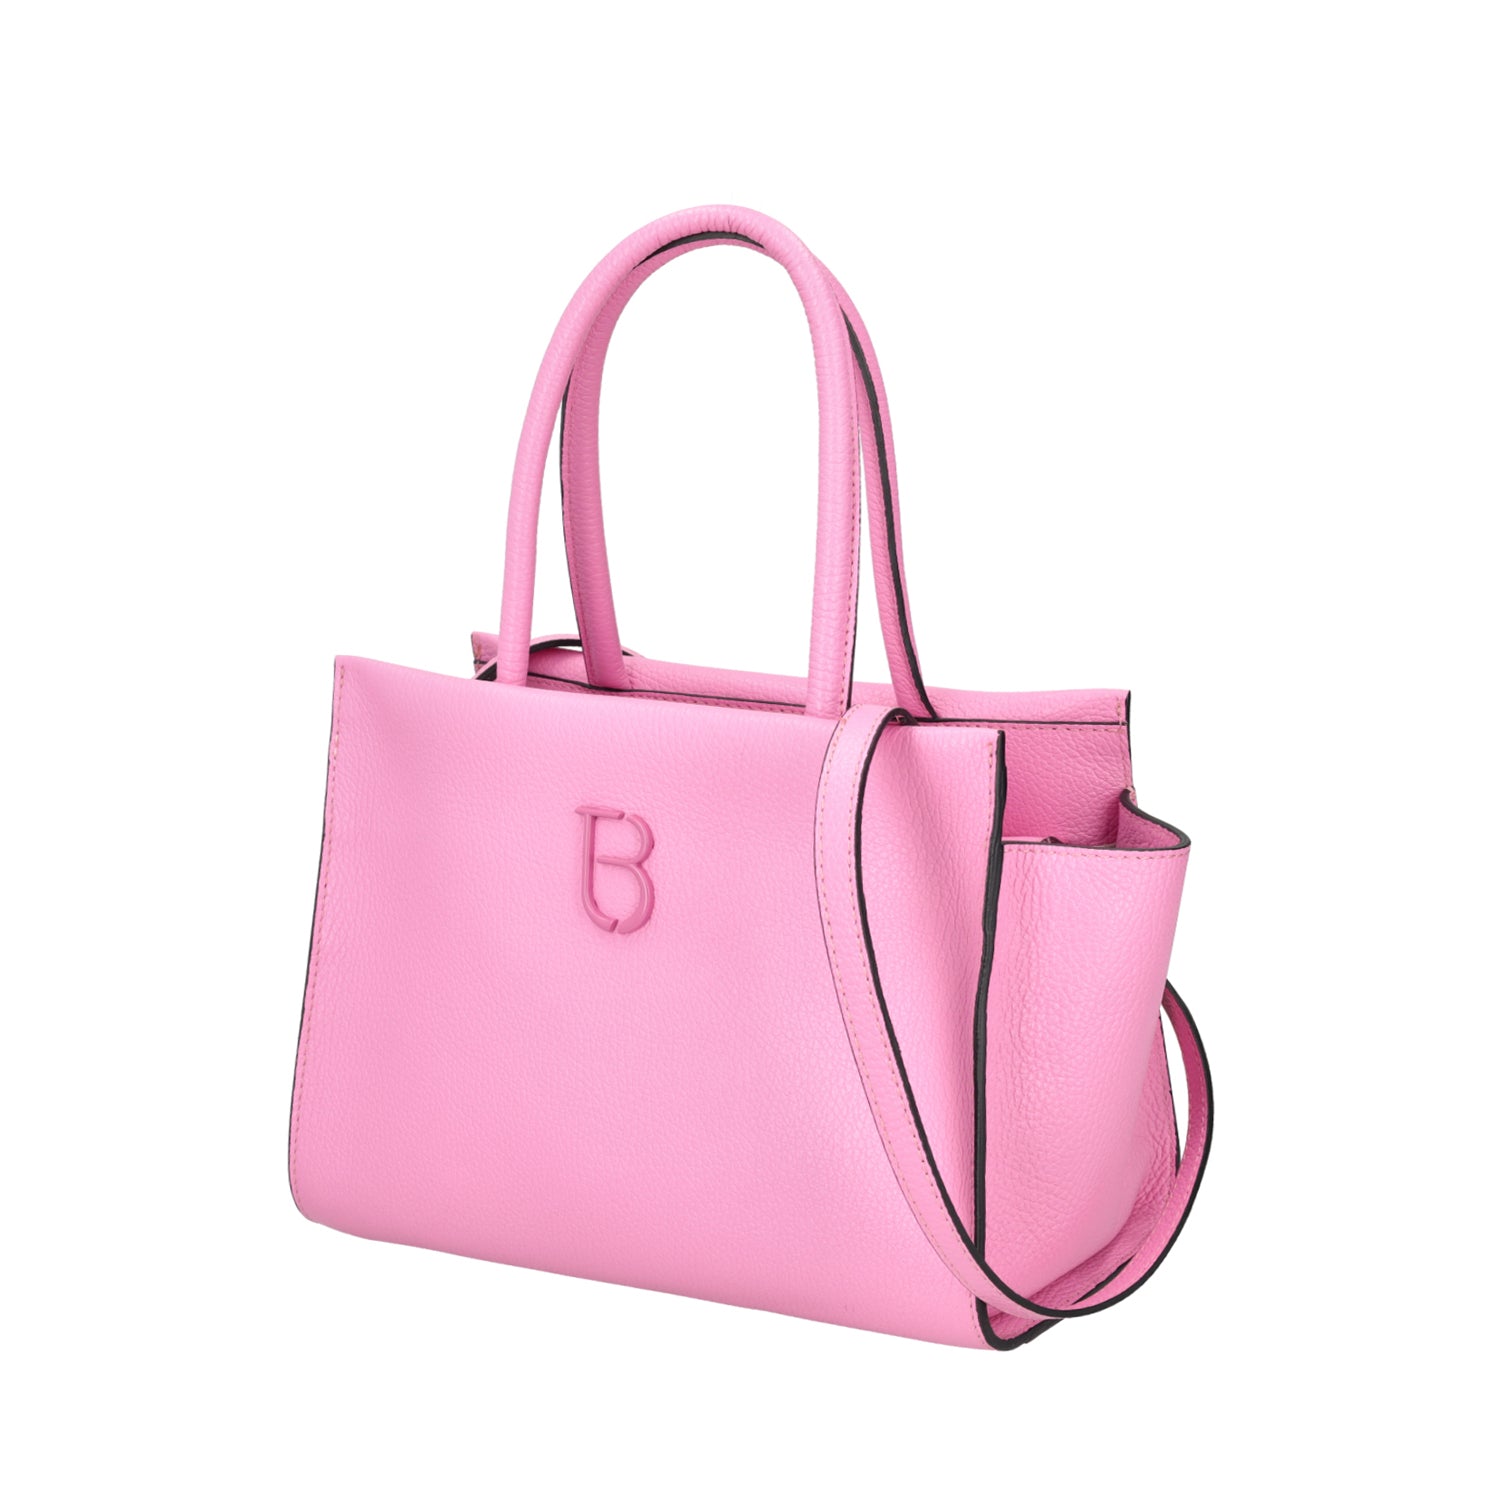 PINK NARCISO HAND BAG IN LEATHER